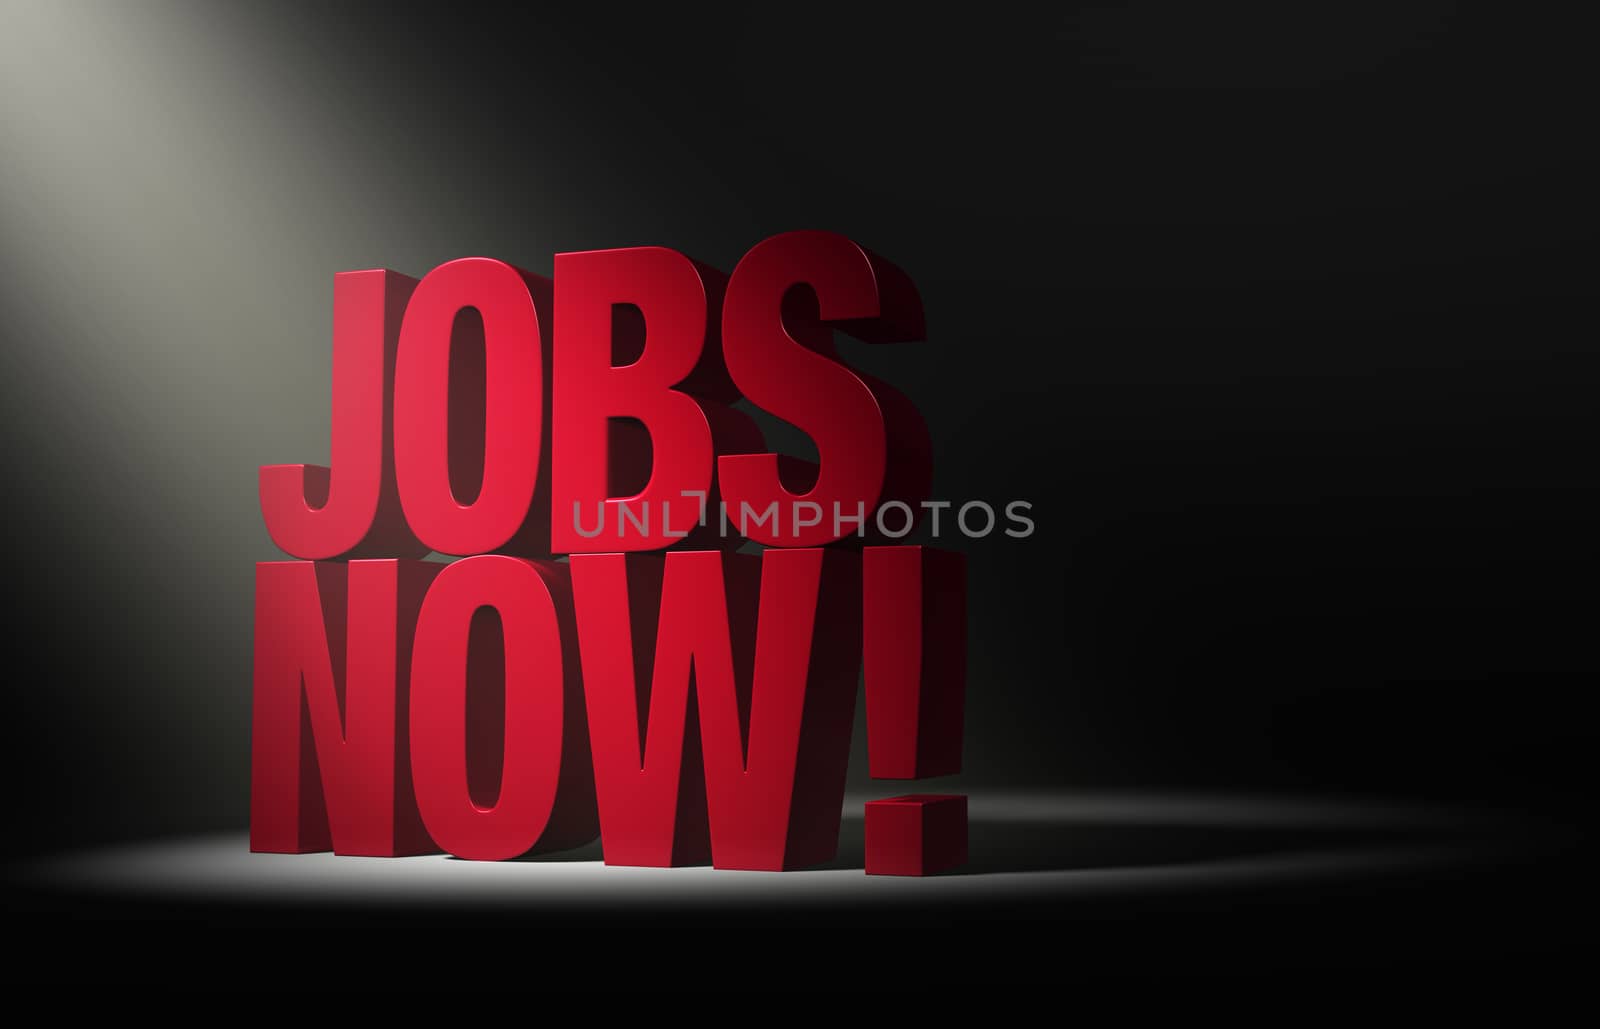 Angled spotlight reveals a bold, red "JOBS NOW!" on a dark background.